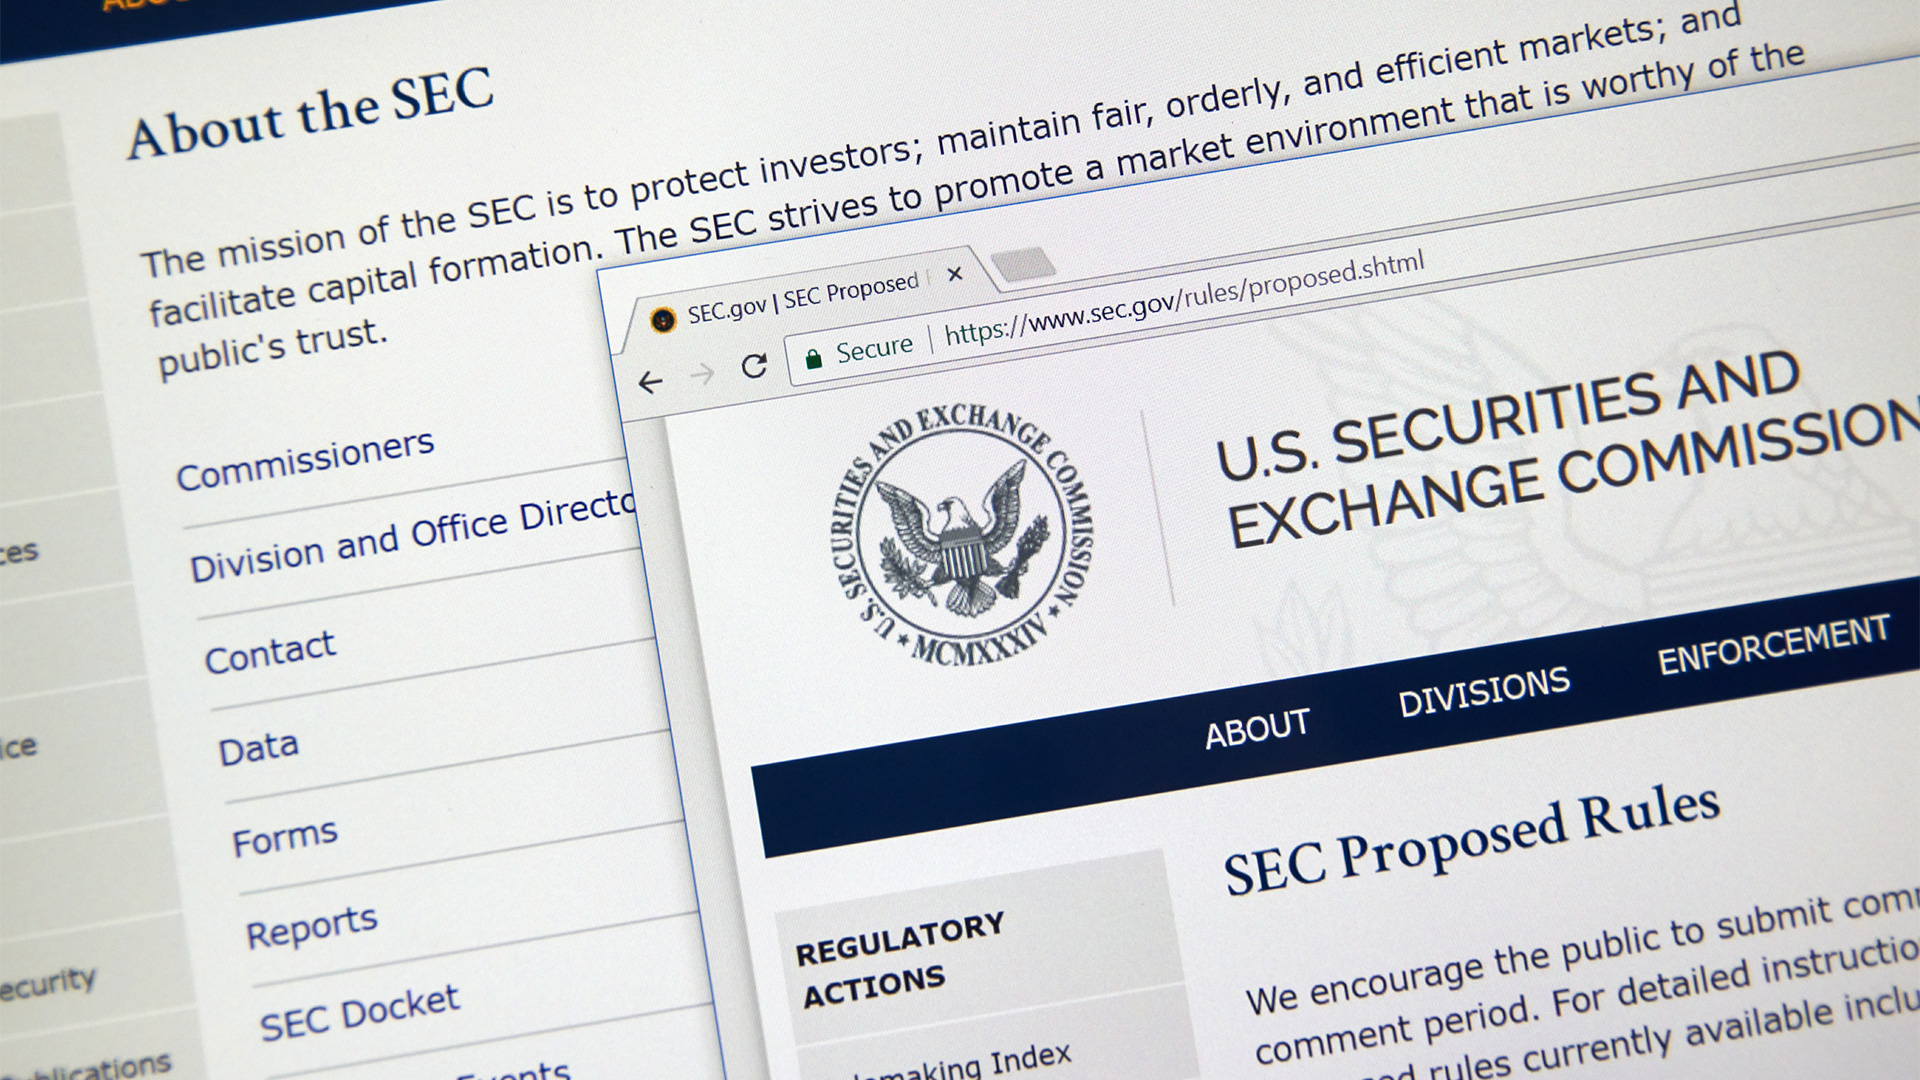 Smith Research Identifies Flaw in SEC Move to Help Investors in Retail Stock Trading Surge